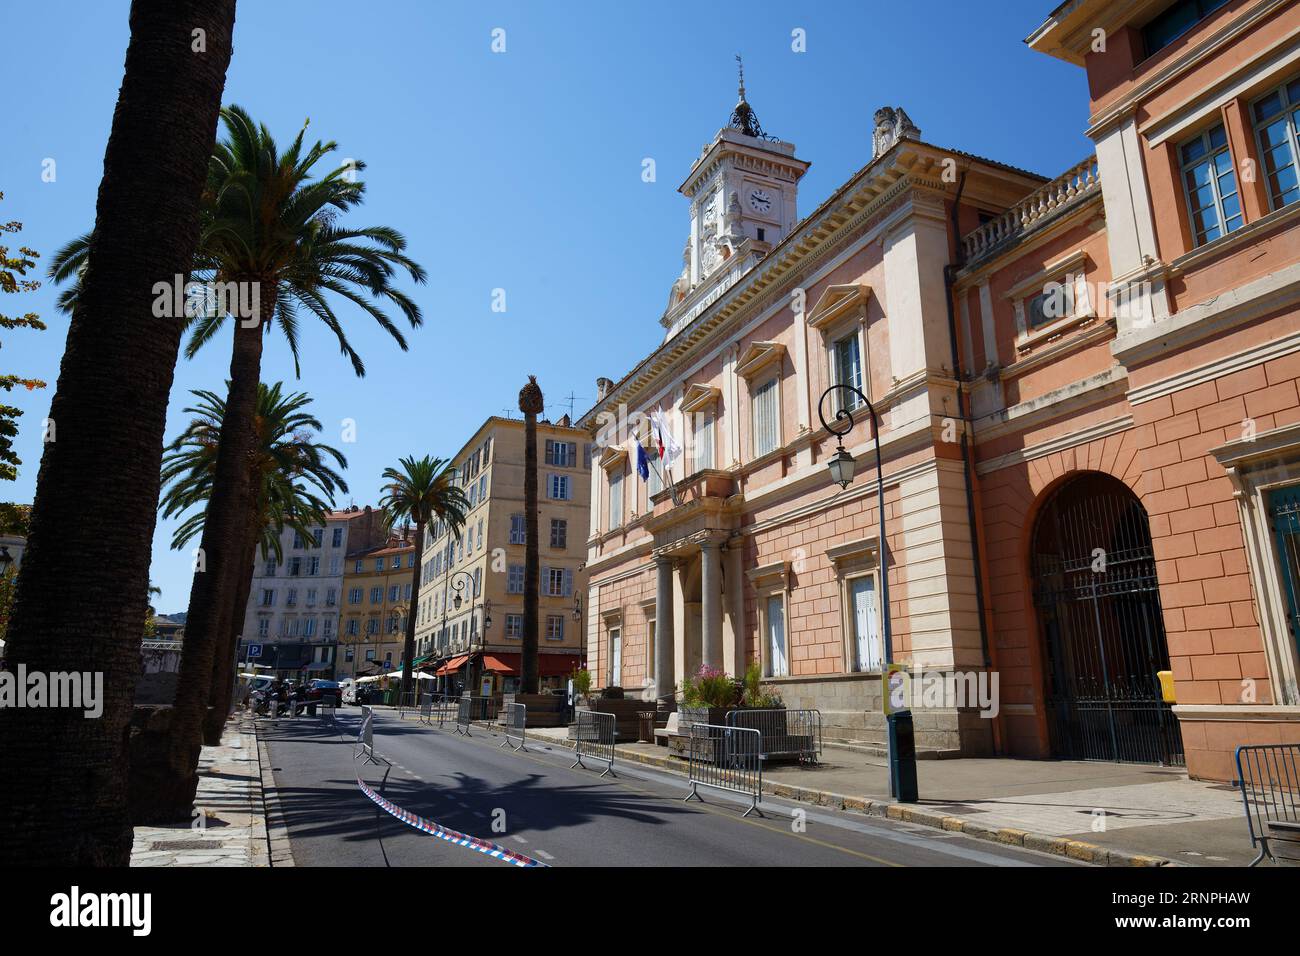 The city hall of Ajaccio framed by palm fronds. Ajaccio is the capital of South Corsica island, France. Stock Photo